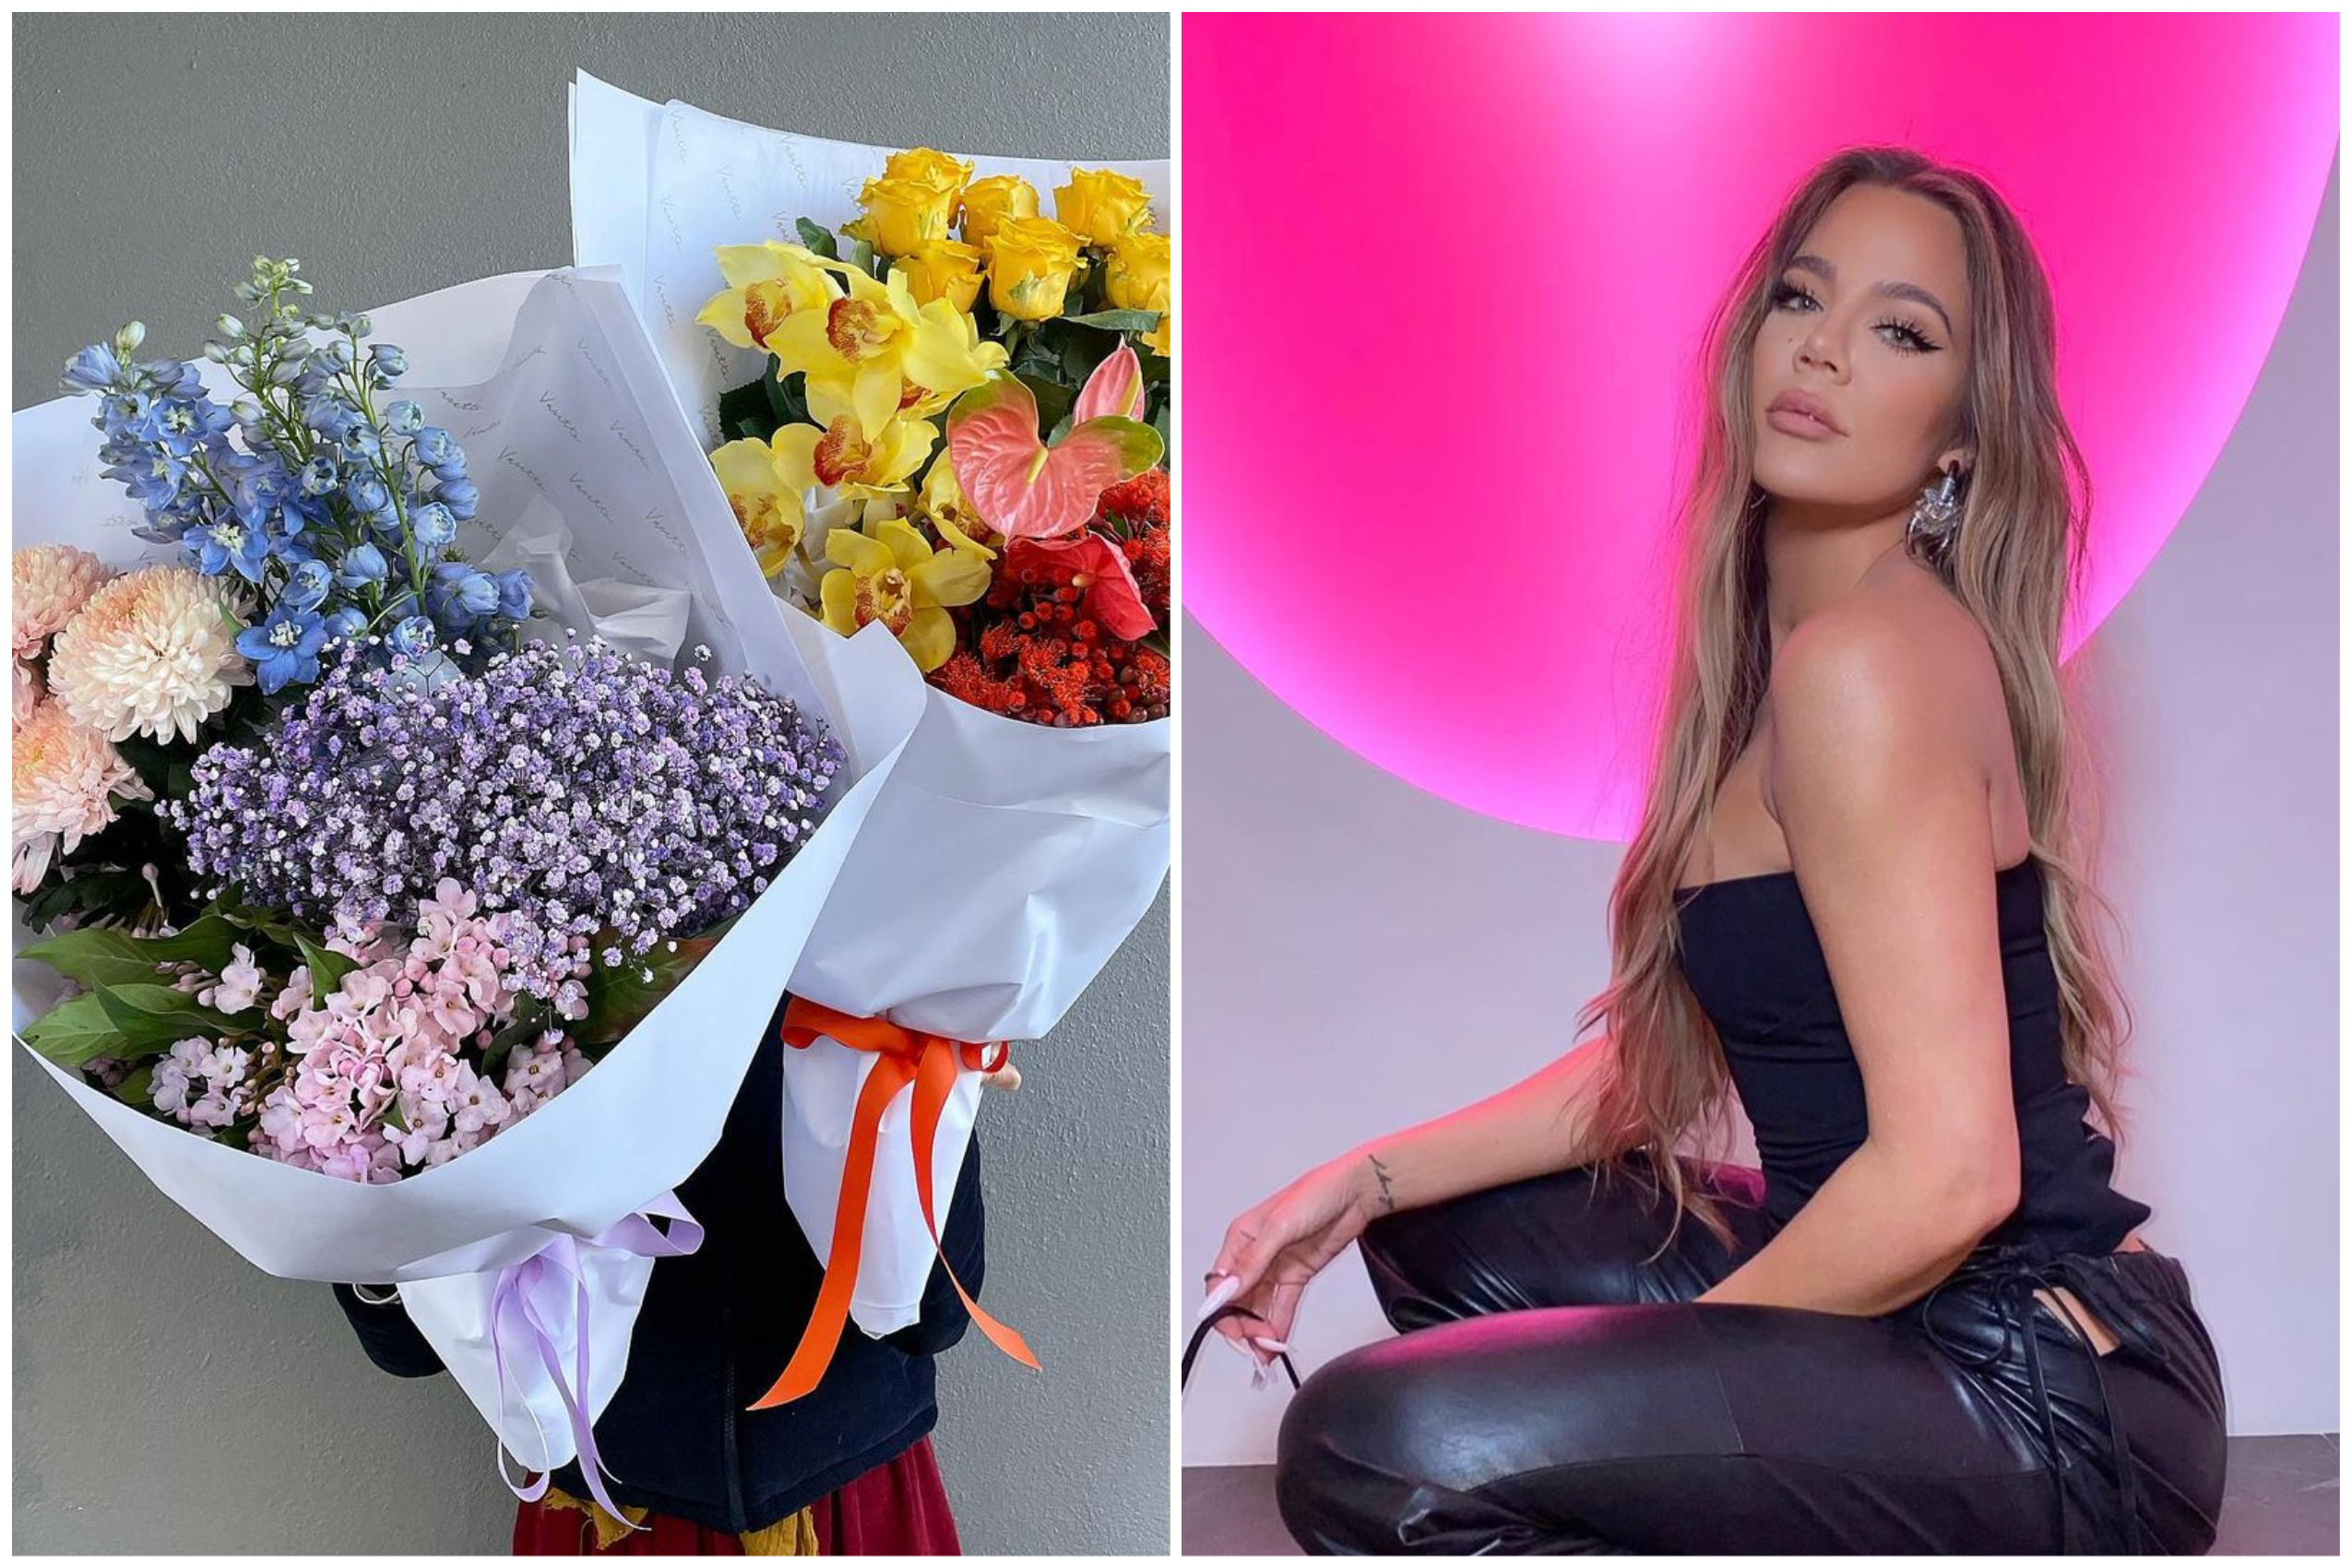 Khloé K Has Now Been Accused Of Stealing A Melb Florist’s IG Pics Which Is, Again, Unexpected